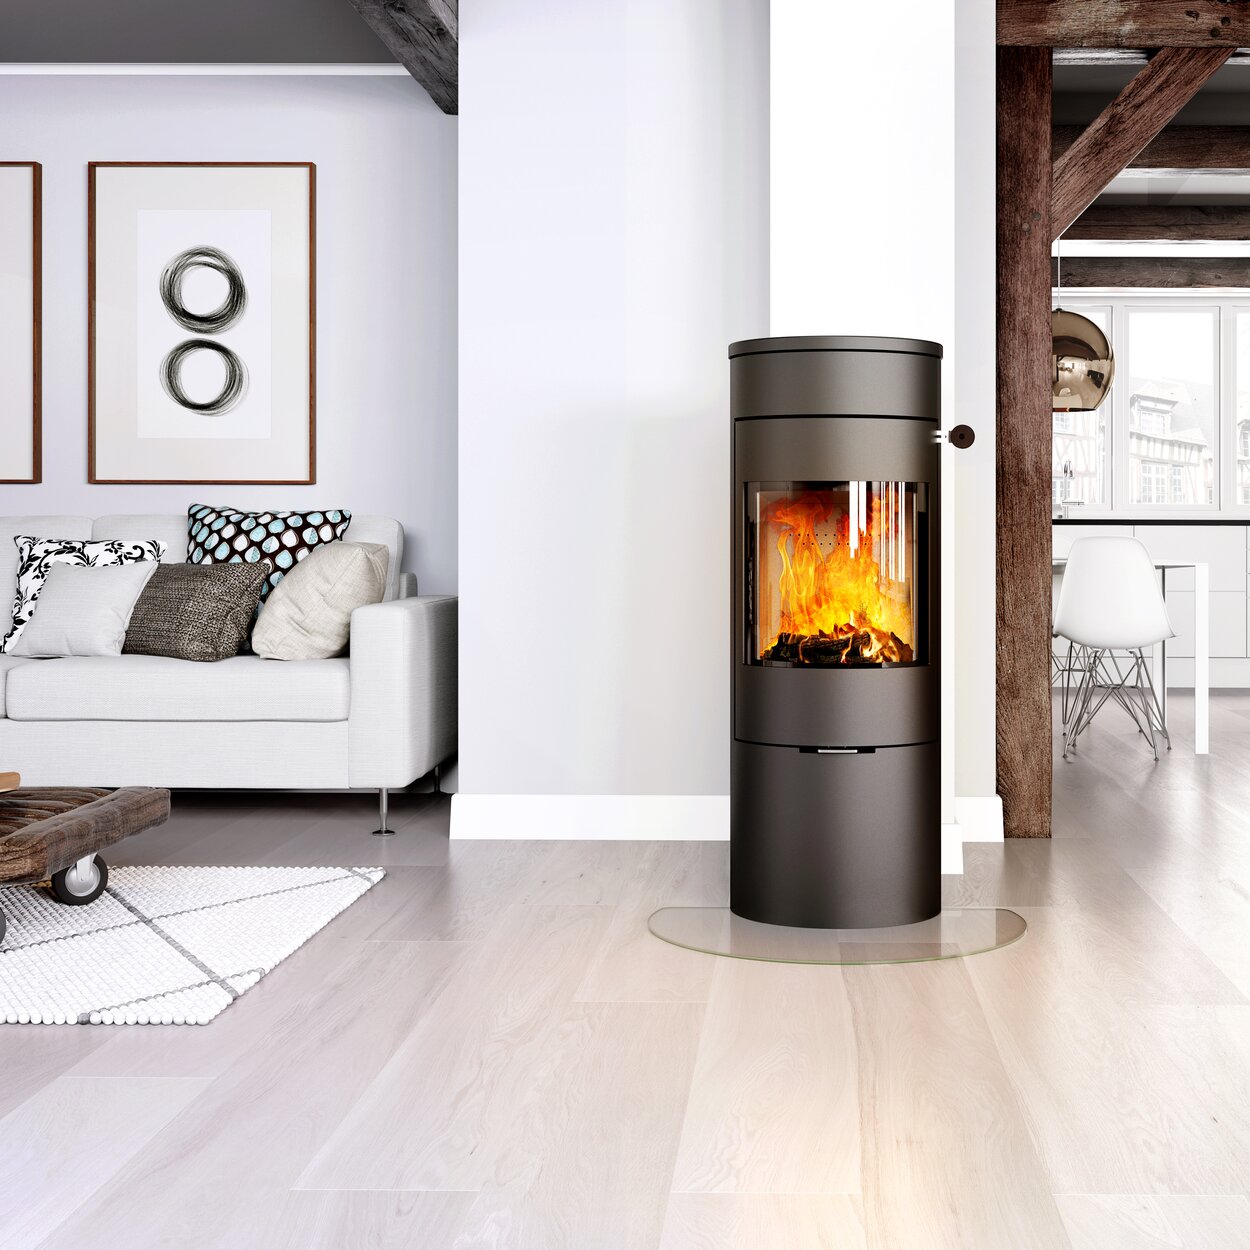 Wood stove VIVA 120 L in black with steel door in a bright, open living space